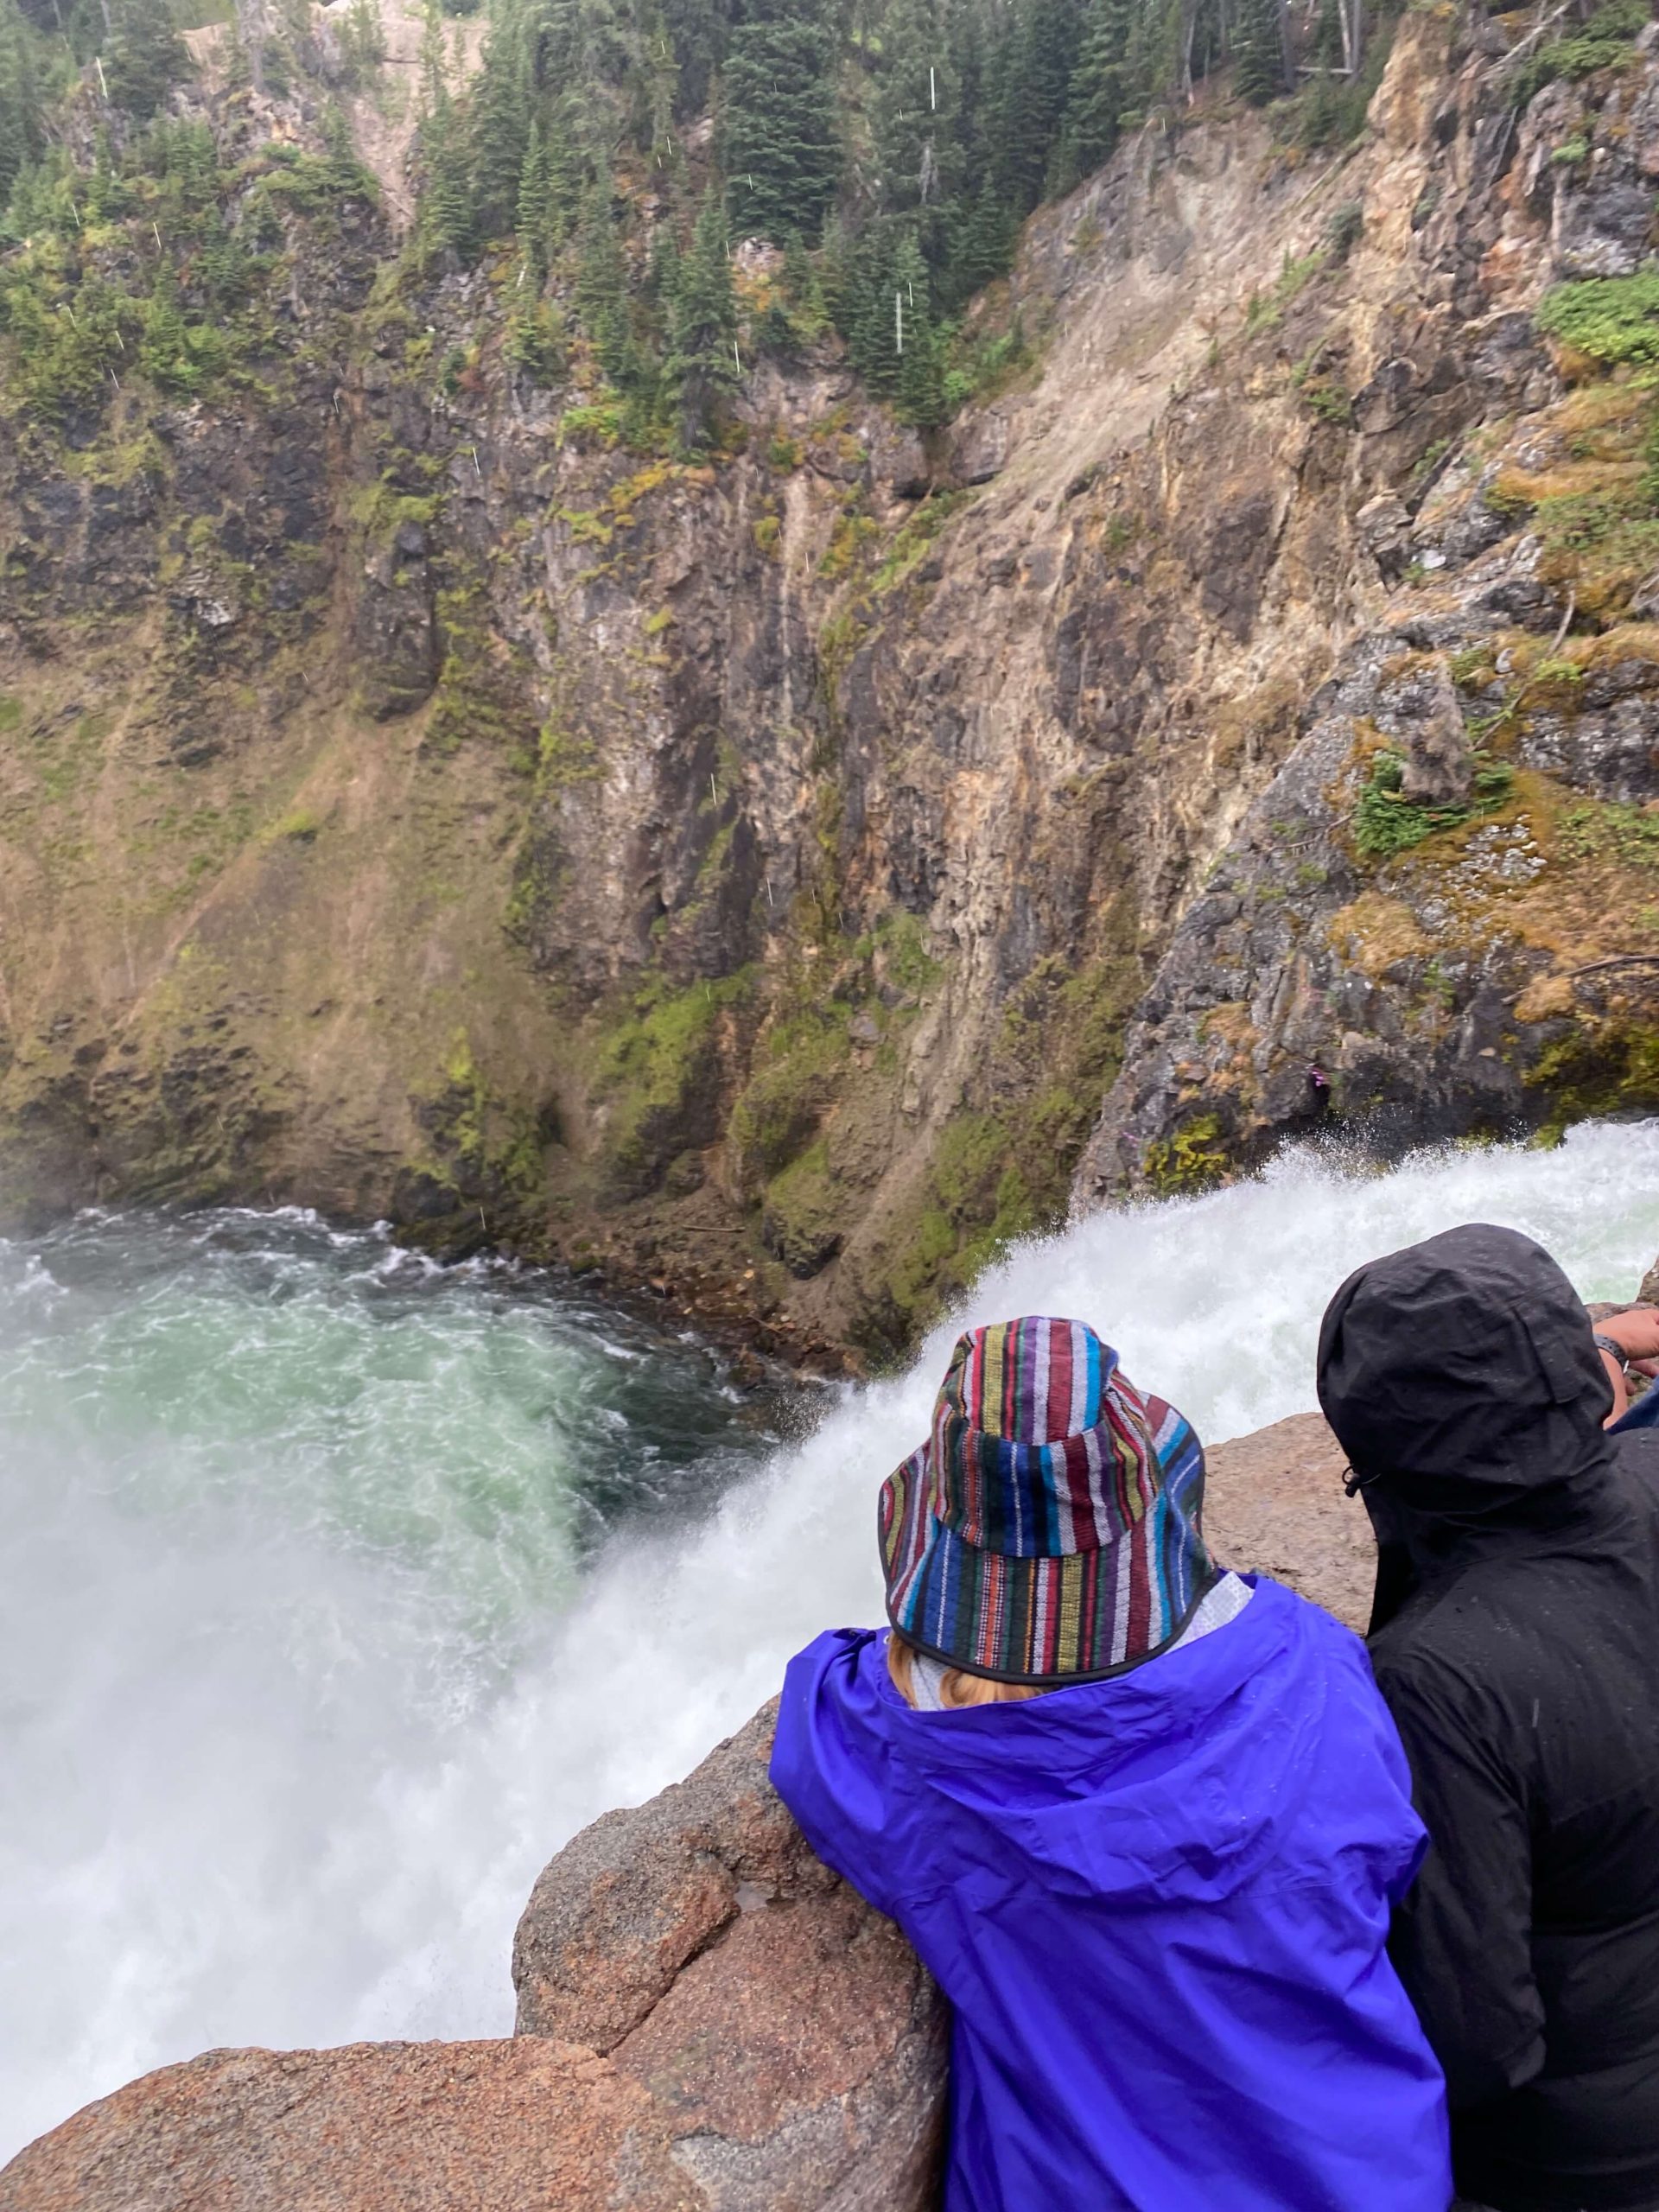 Two People Overlooking a Waterfall